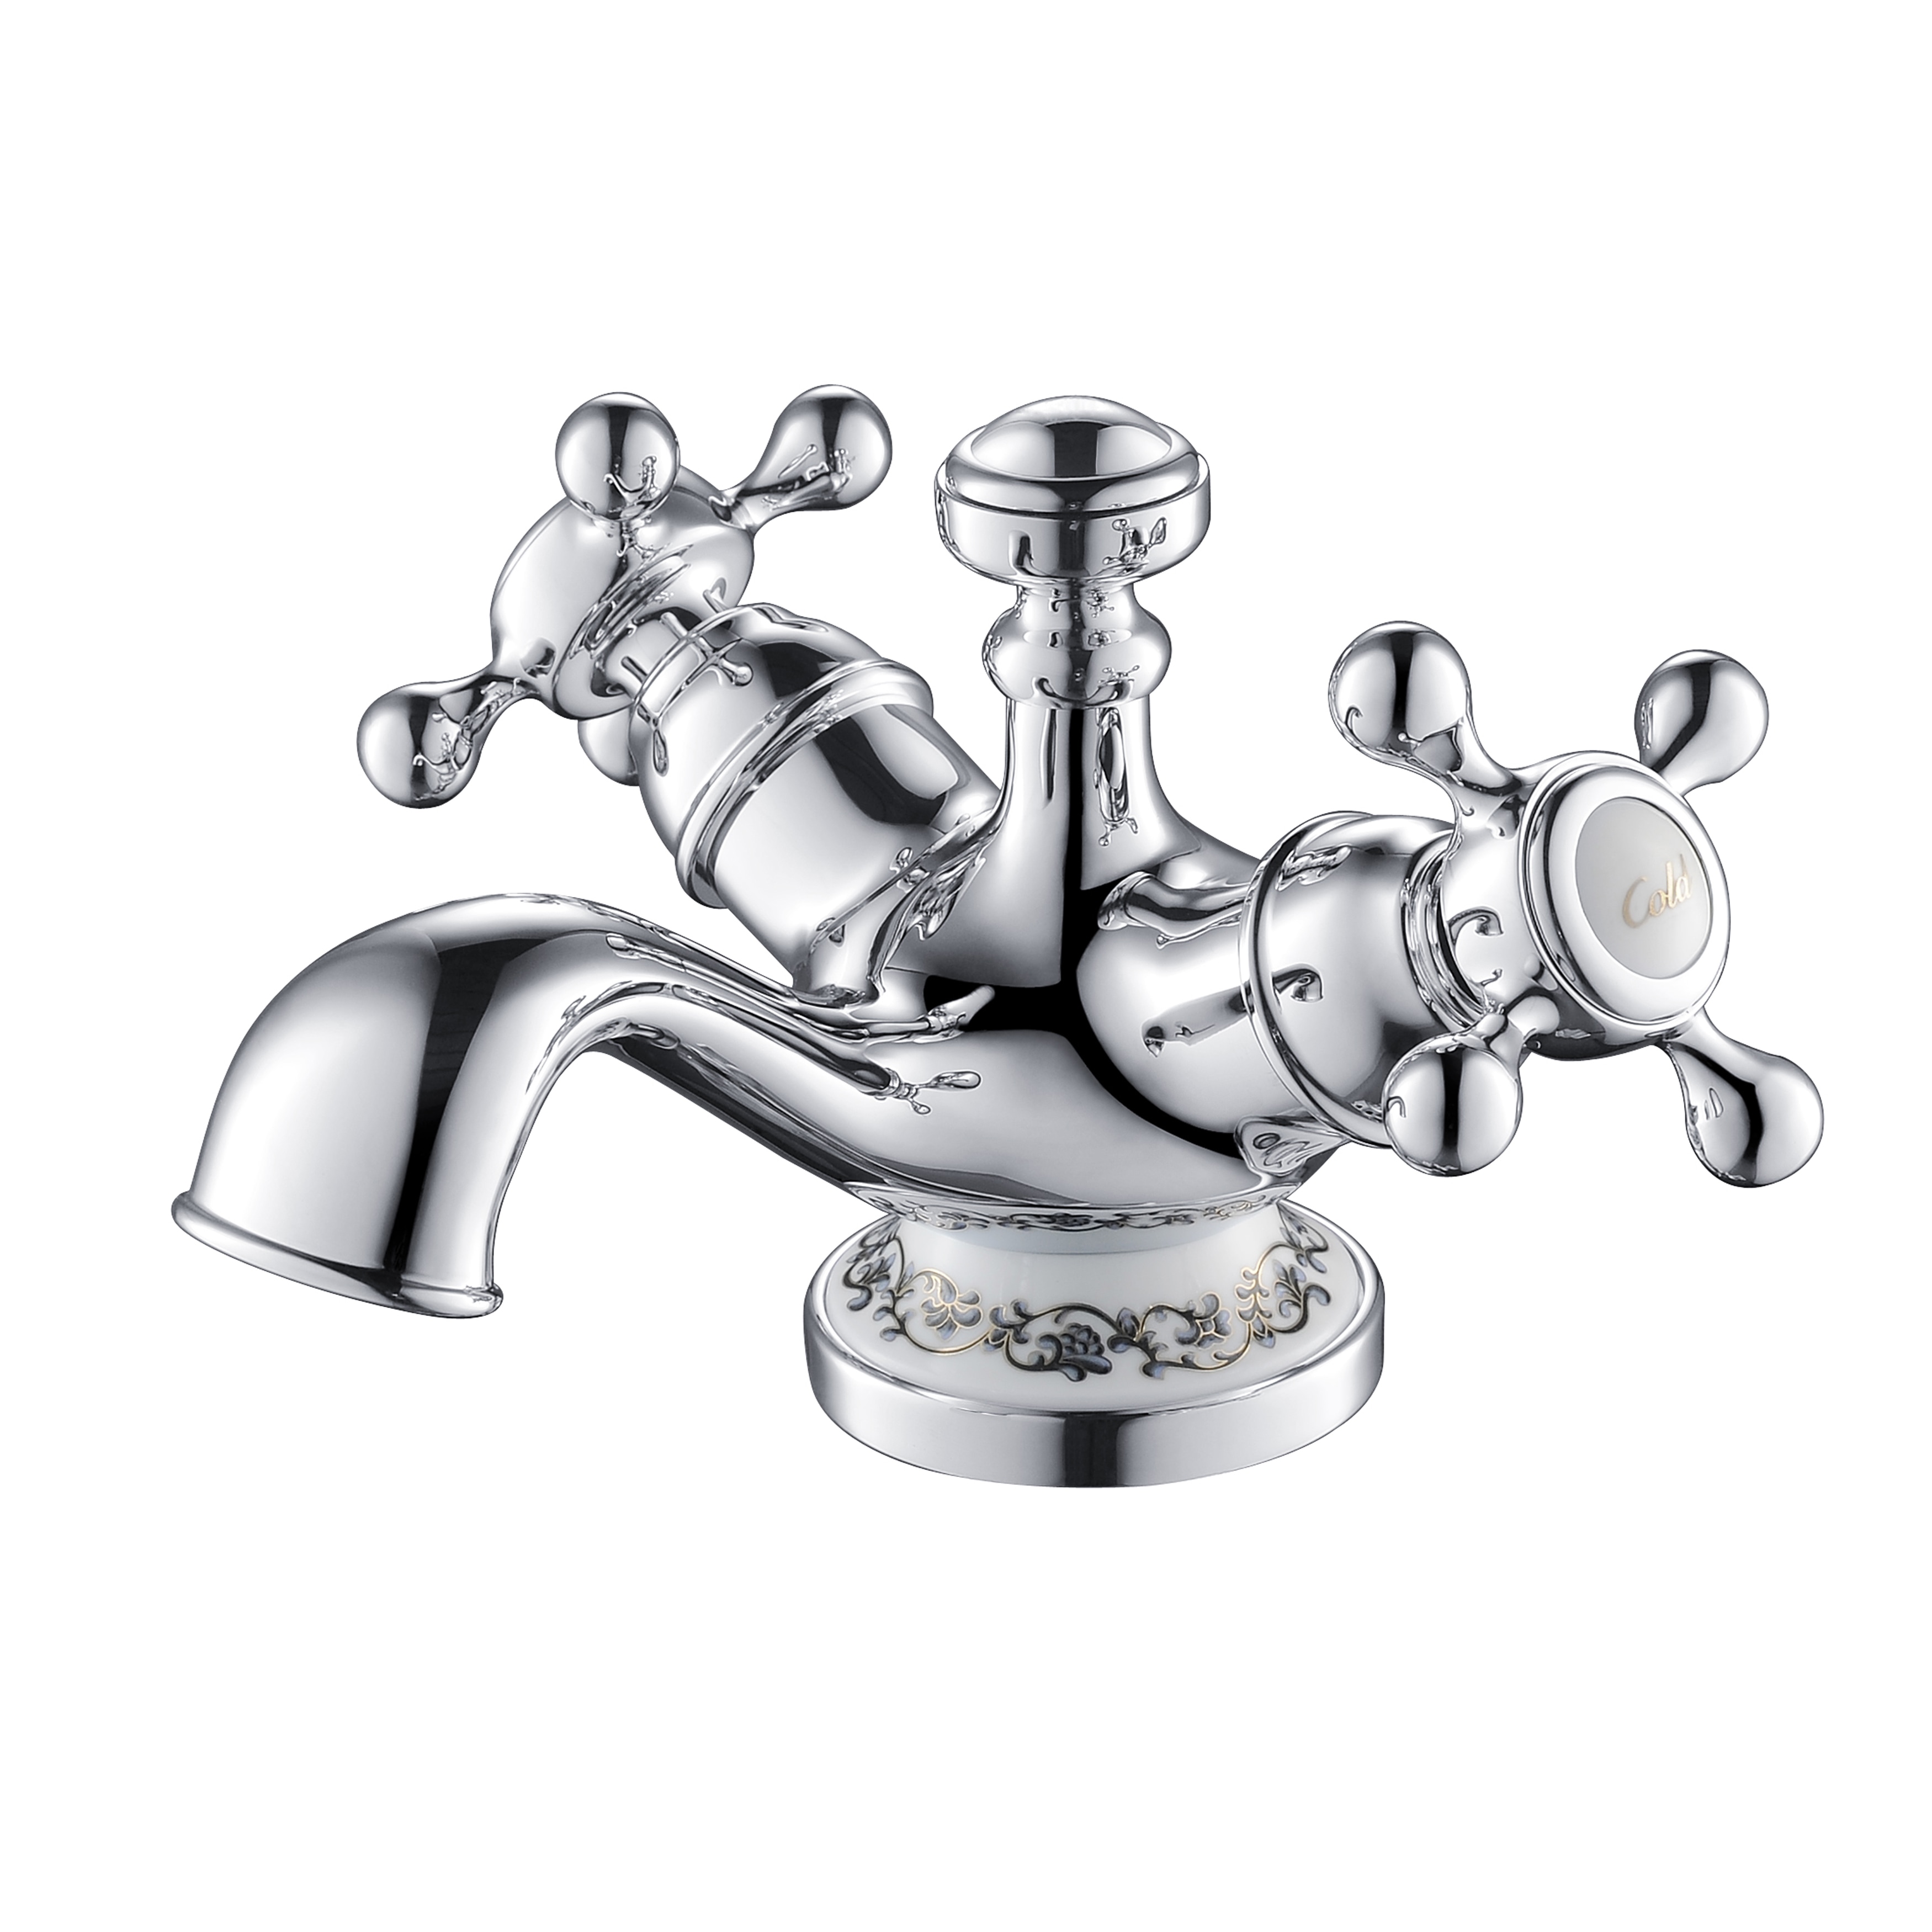 Kraus Apollo Single hole Basin Faucet Chrome See Price in Cart